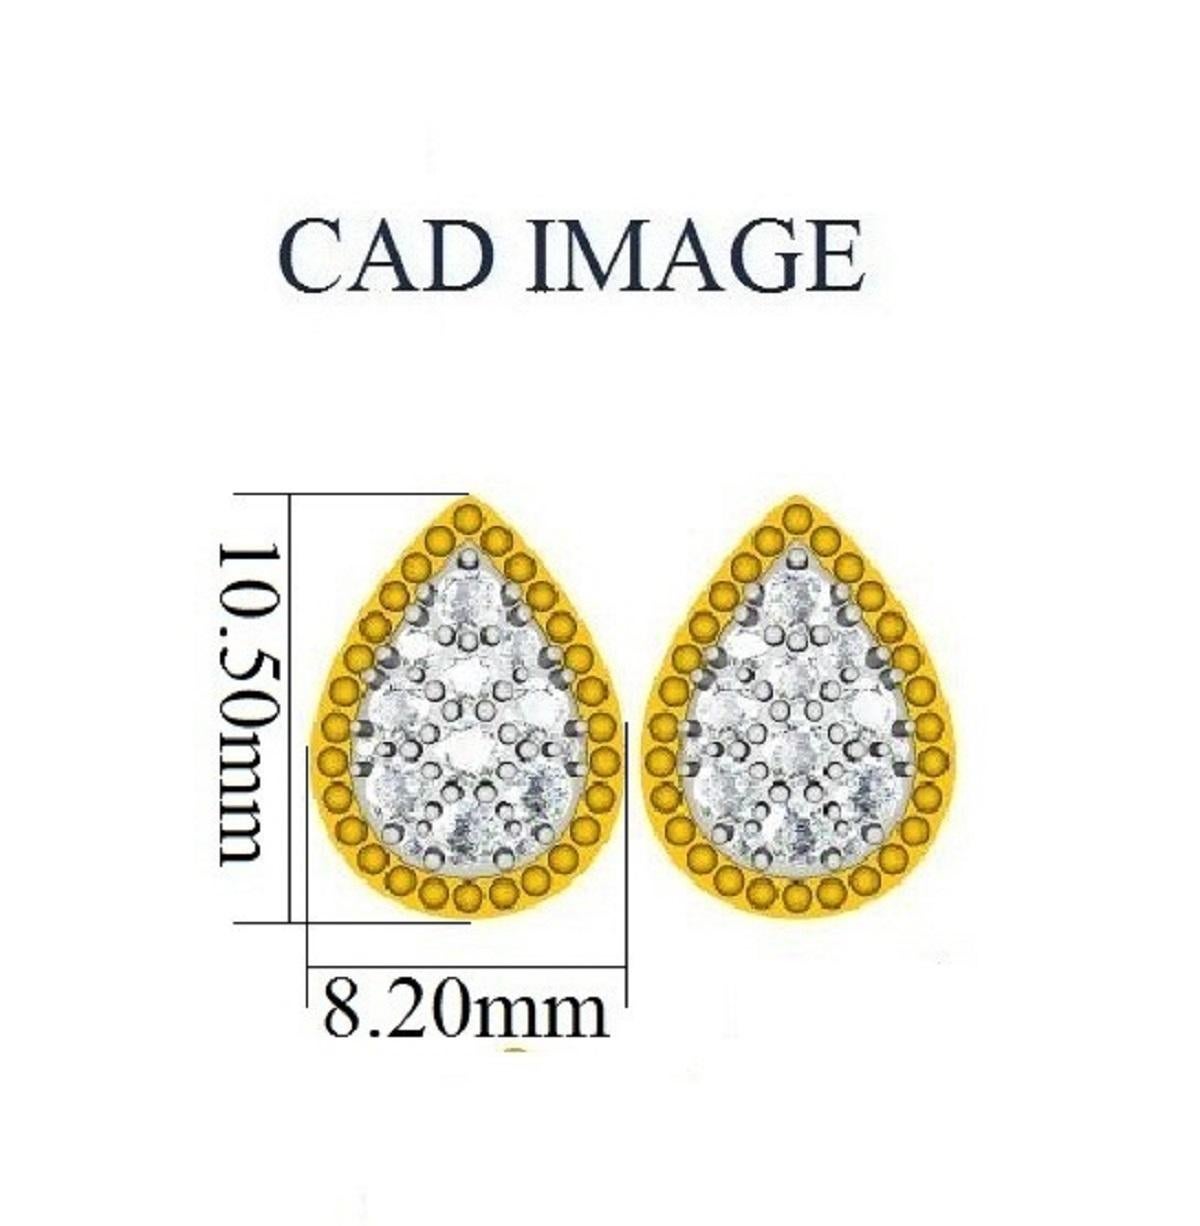 Honor the women you love with this designer diamond stud earring is expertly crafted in 0.50 carat 14 Karat yellow Gold and features 28 round diamond set in prong setting. This hoop earring has high polish finish and is a valuable addition to any